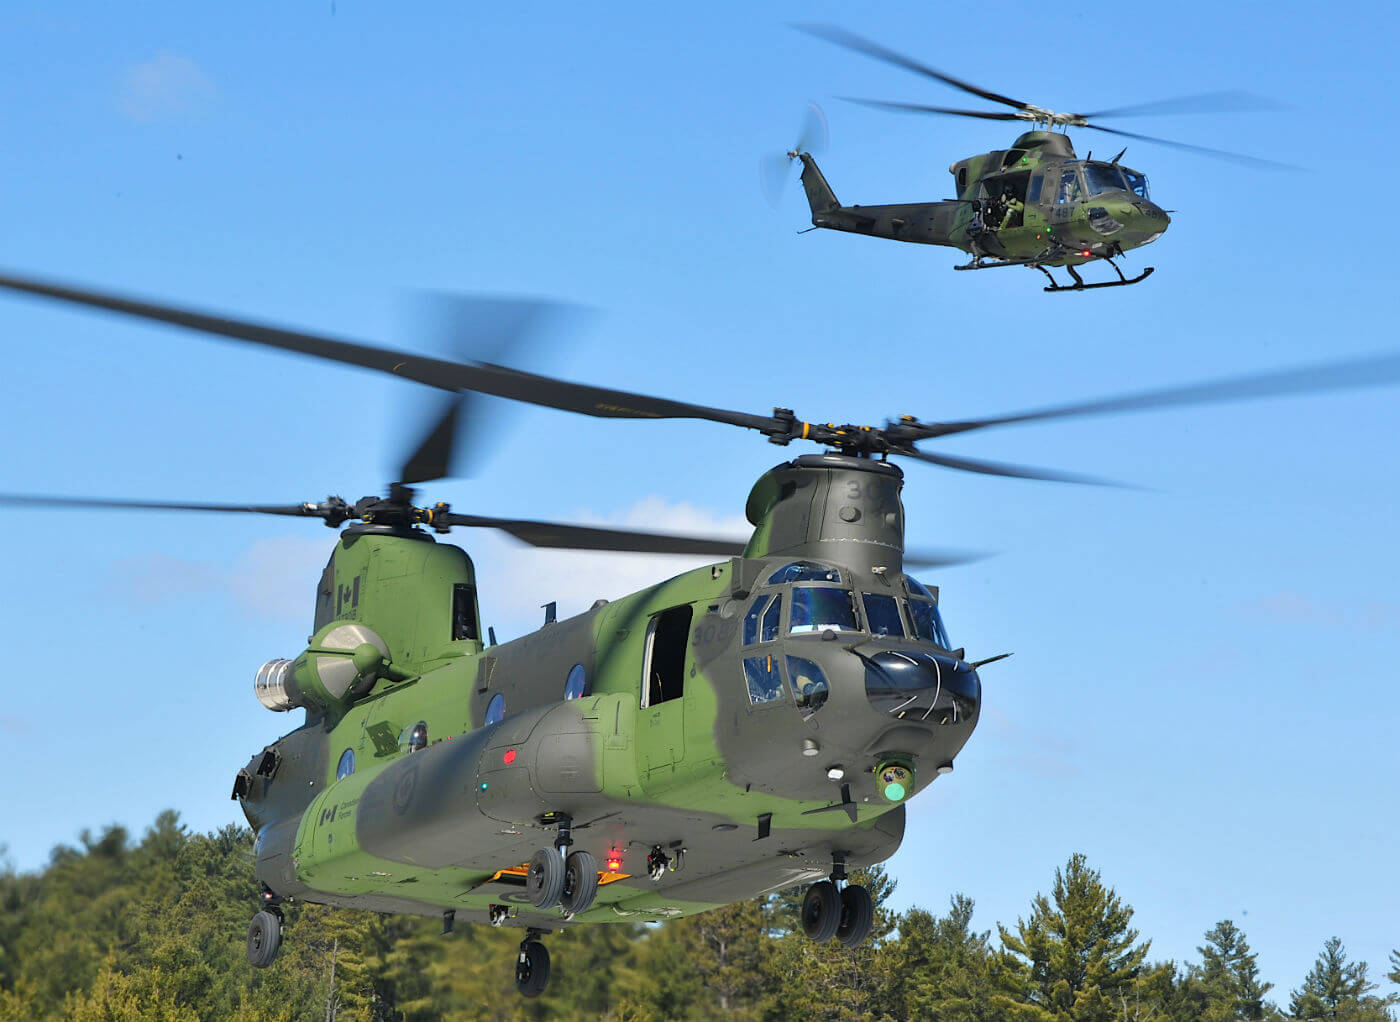 The Chinooks are essential to transport light infantry battalions and sustain troops throughout the battle space, and are steadily being integrated into the army's force employment concept. Mike Reyno Photo